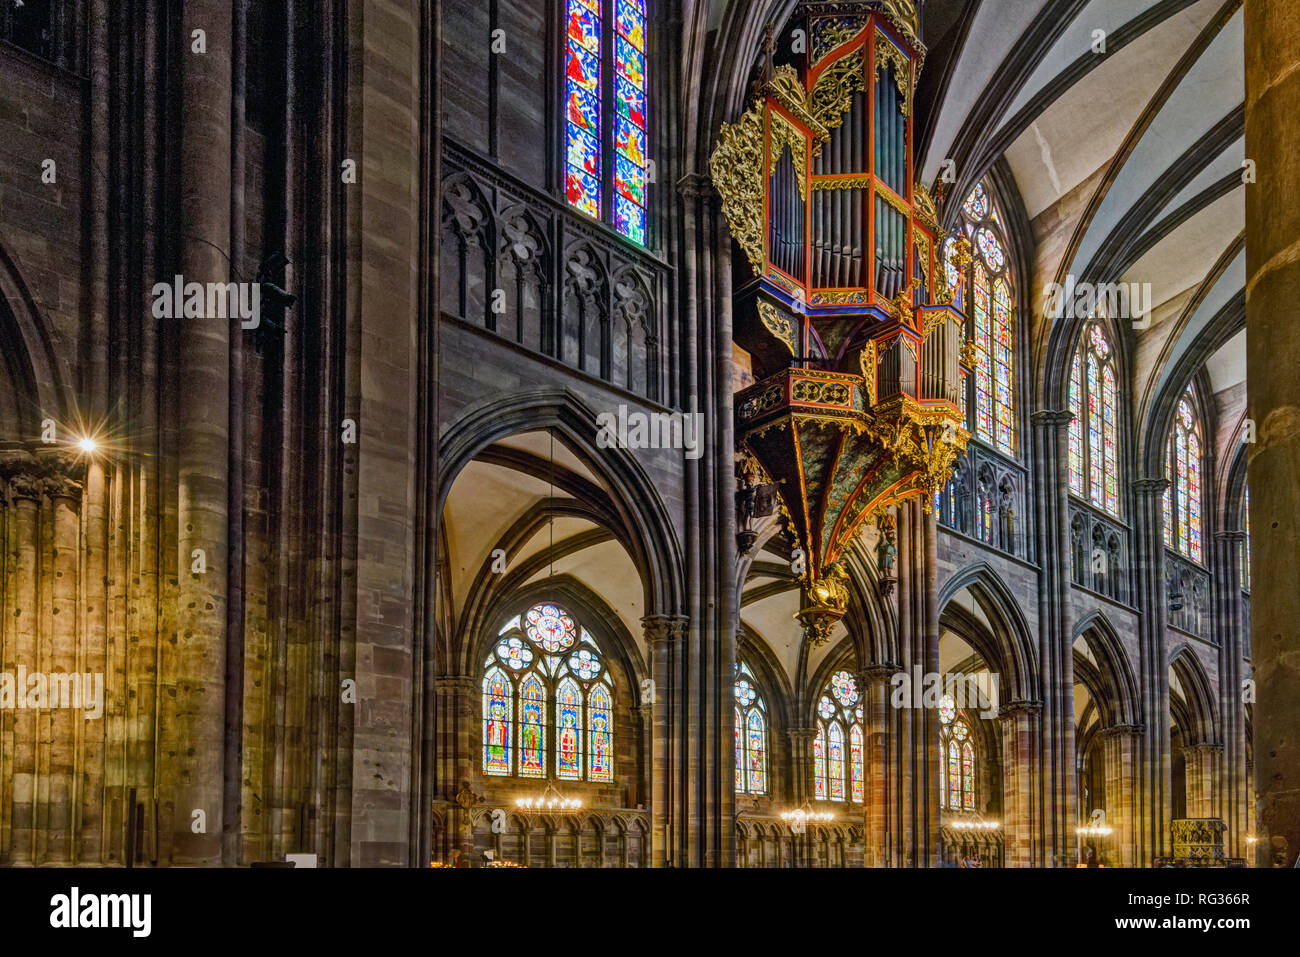 The great organ in swallow's nest in the cathedral of Strasbourg, France Stock Photo